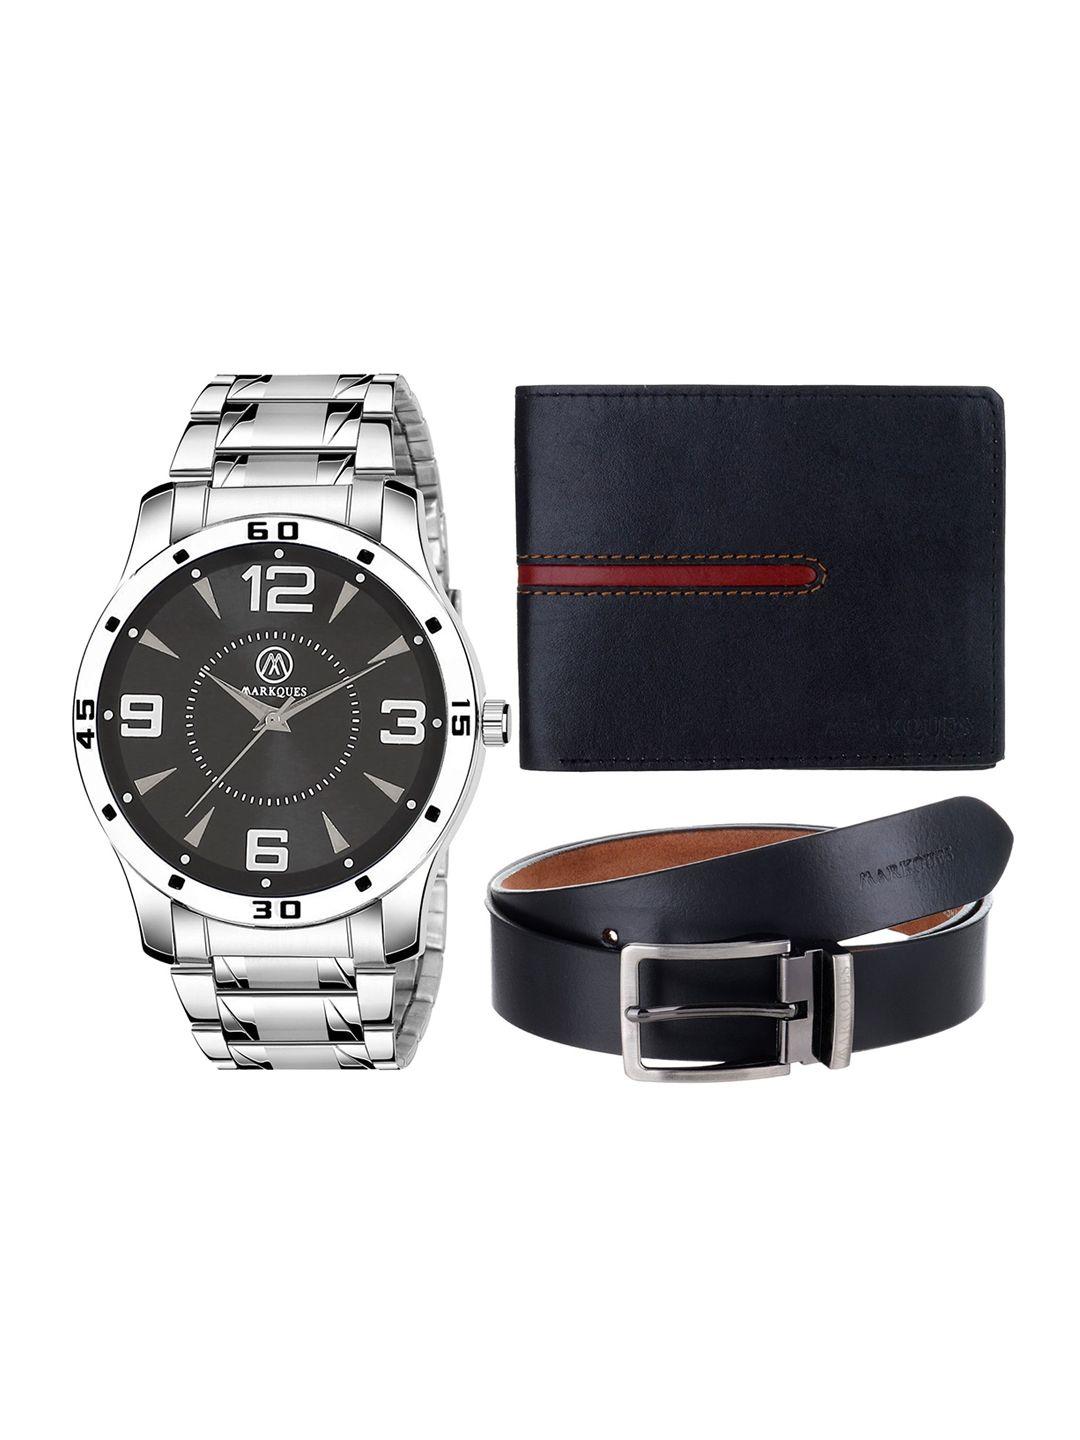 markques men navy blue & silver-toned solid leather accessory gift set